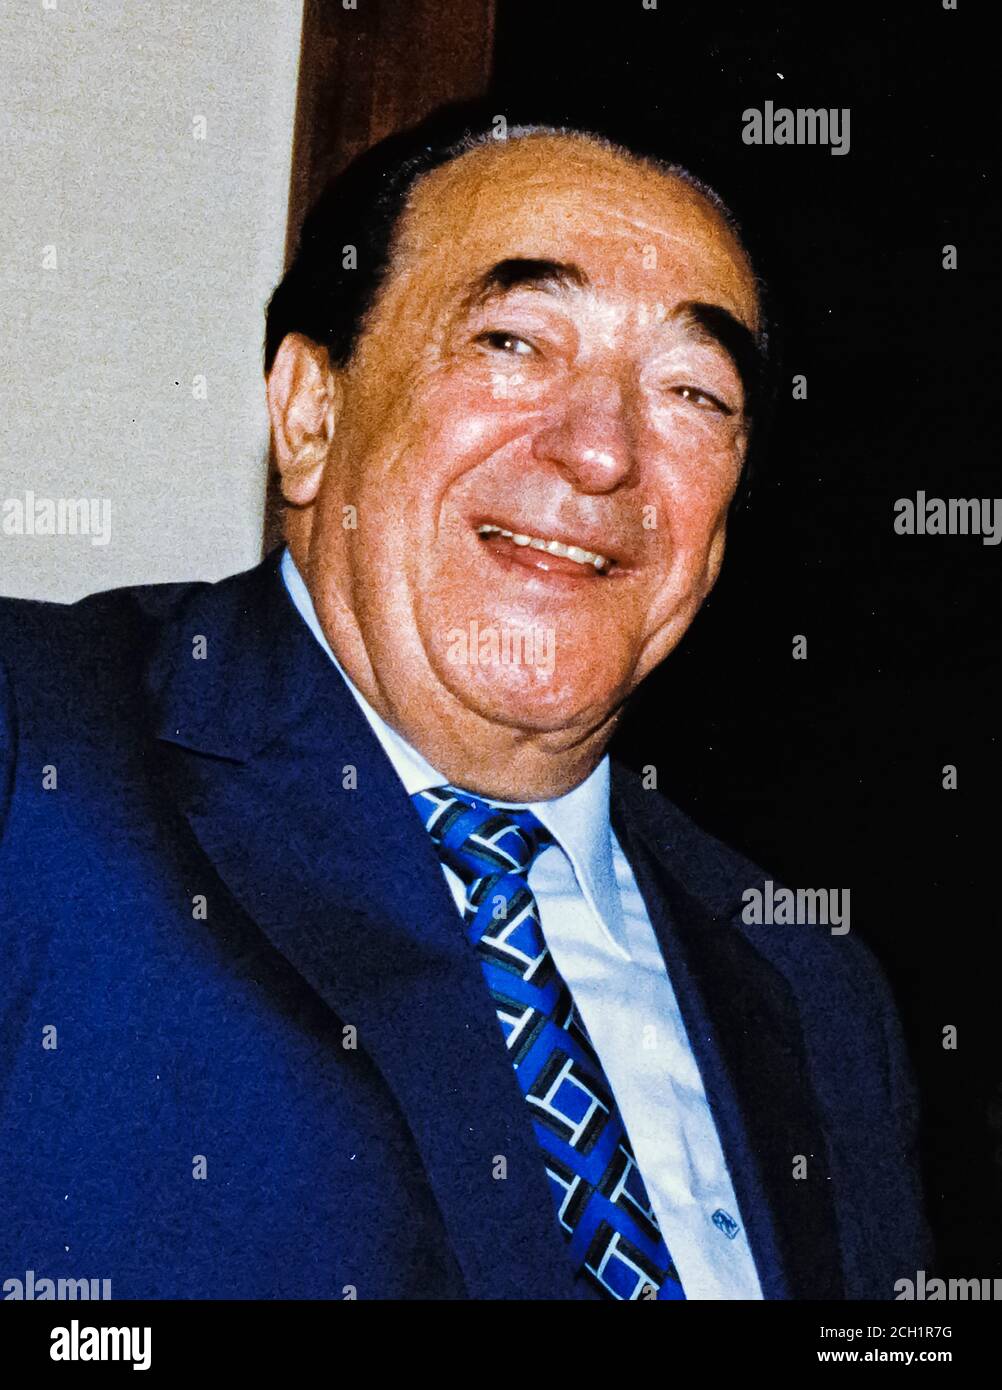 In this file photo from September 25, 1990, disgraced publisher Robert Maxwell, meets South African Ambassador to the United States Piet G.J. Koornhof in Washington, DC on September 25, 1990. The New York Post is reporting today that Maxwell, through his daughter Ghislaine Maxwell, may have been the source the huge fortune amassed by alleged pedophile Jeffrey Epstein, who hanged himself in his Manhattan lockup last August.Credit: Ron Sachs/CNP | usage worldwide Stock Photo